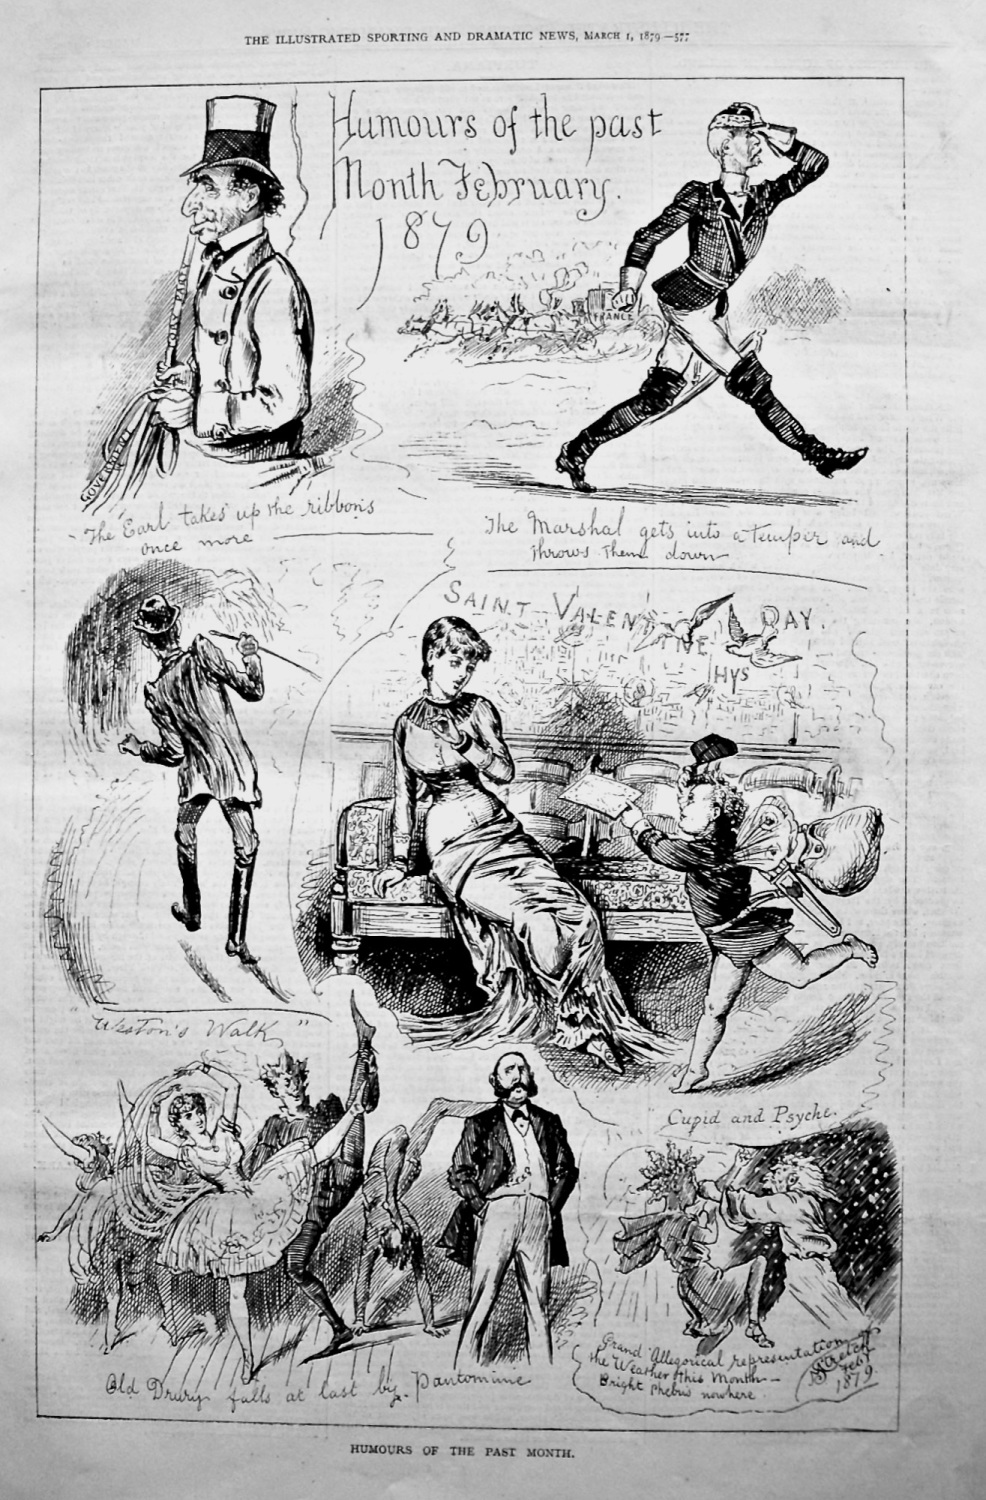 Humours of the Past Month. February 1879. 